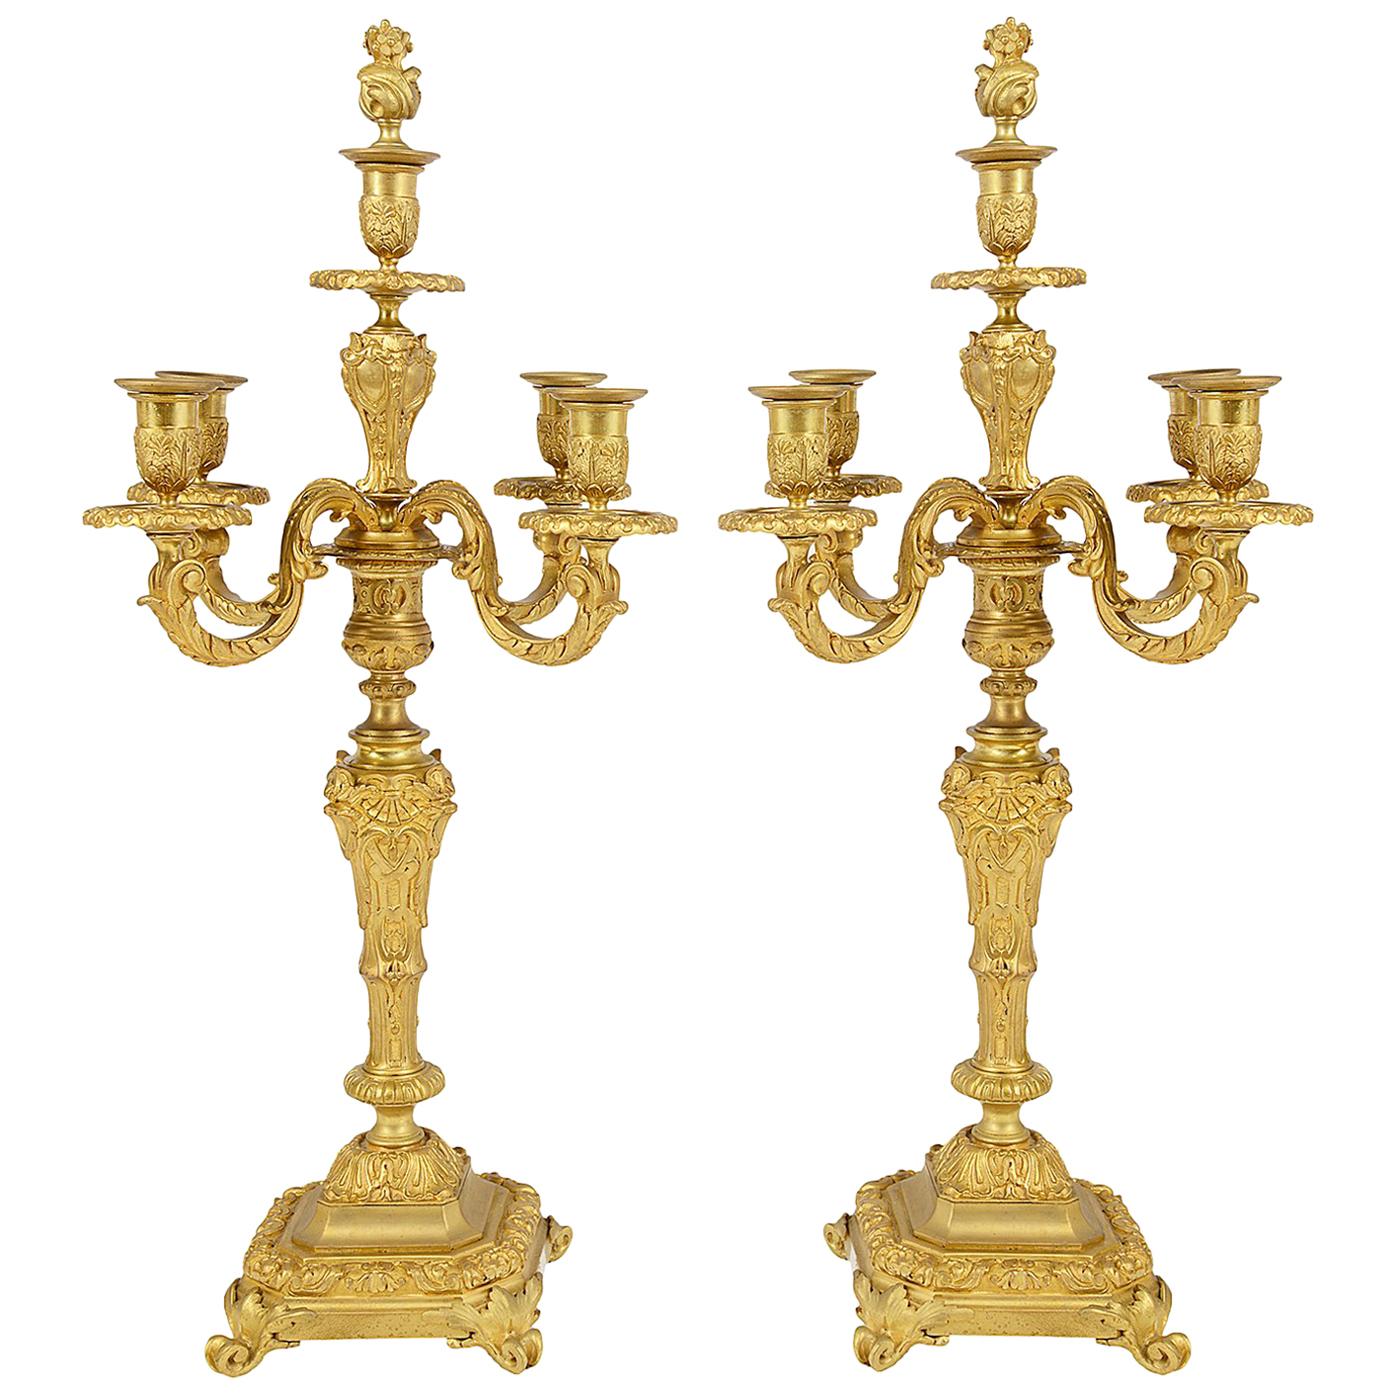 Pair of Classical 19th Century Table Candelabra